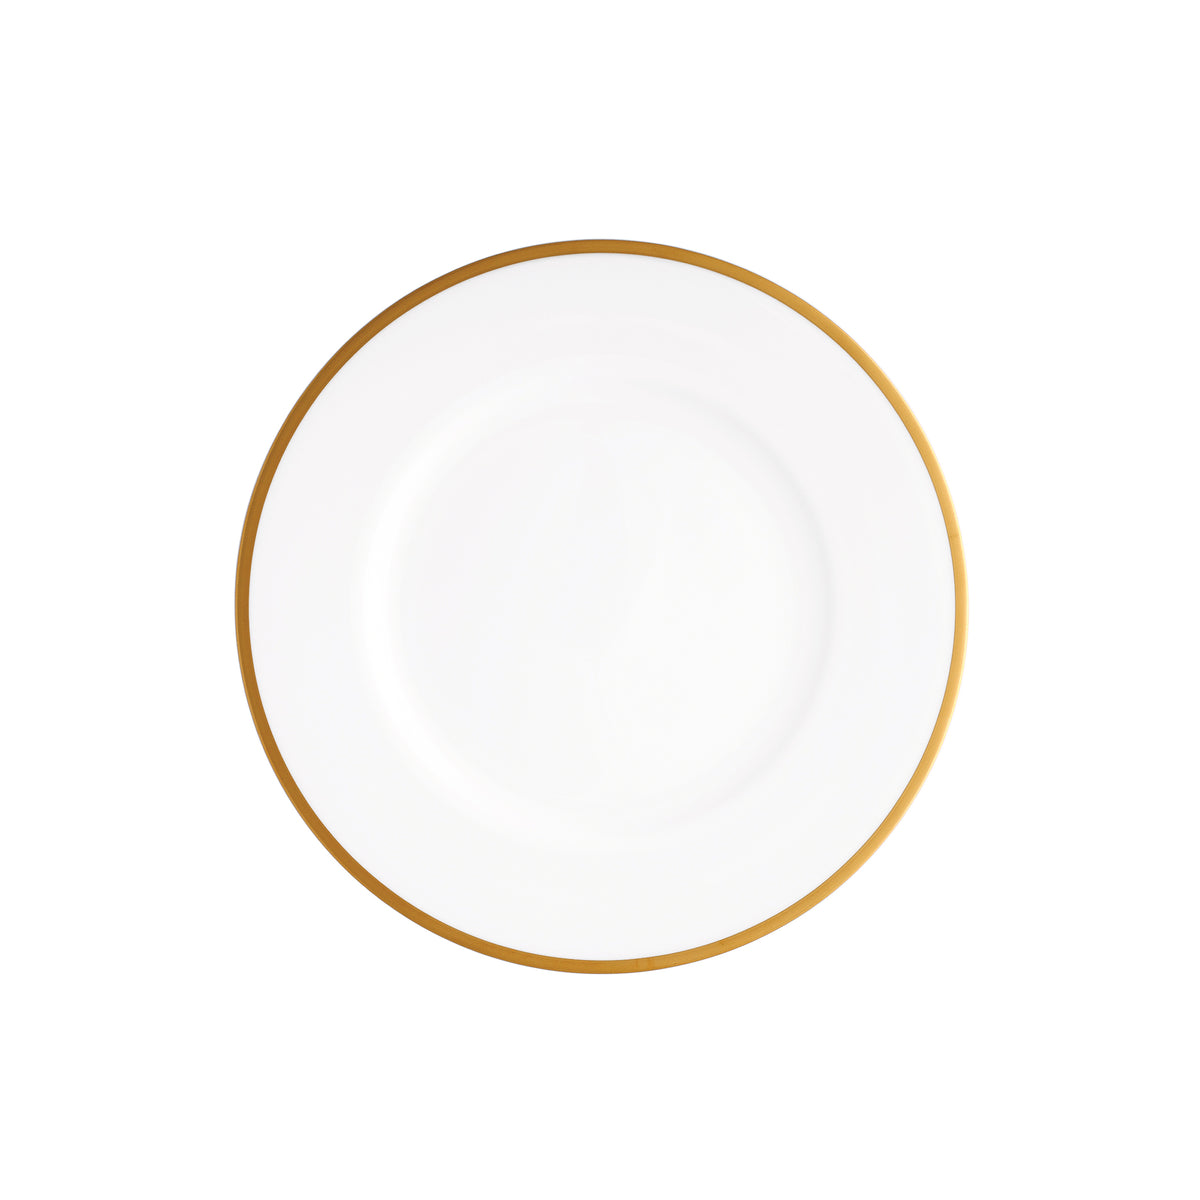 Prouna Comet Gold Bread &amp; Butter Plate White Background Photo